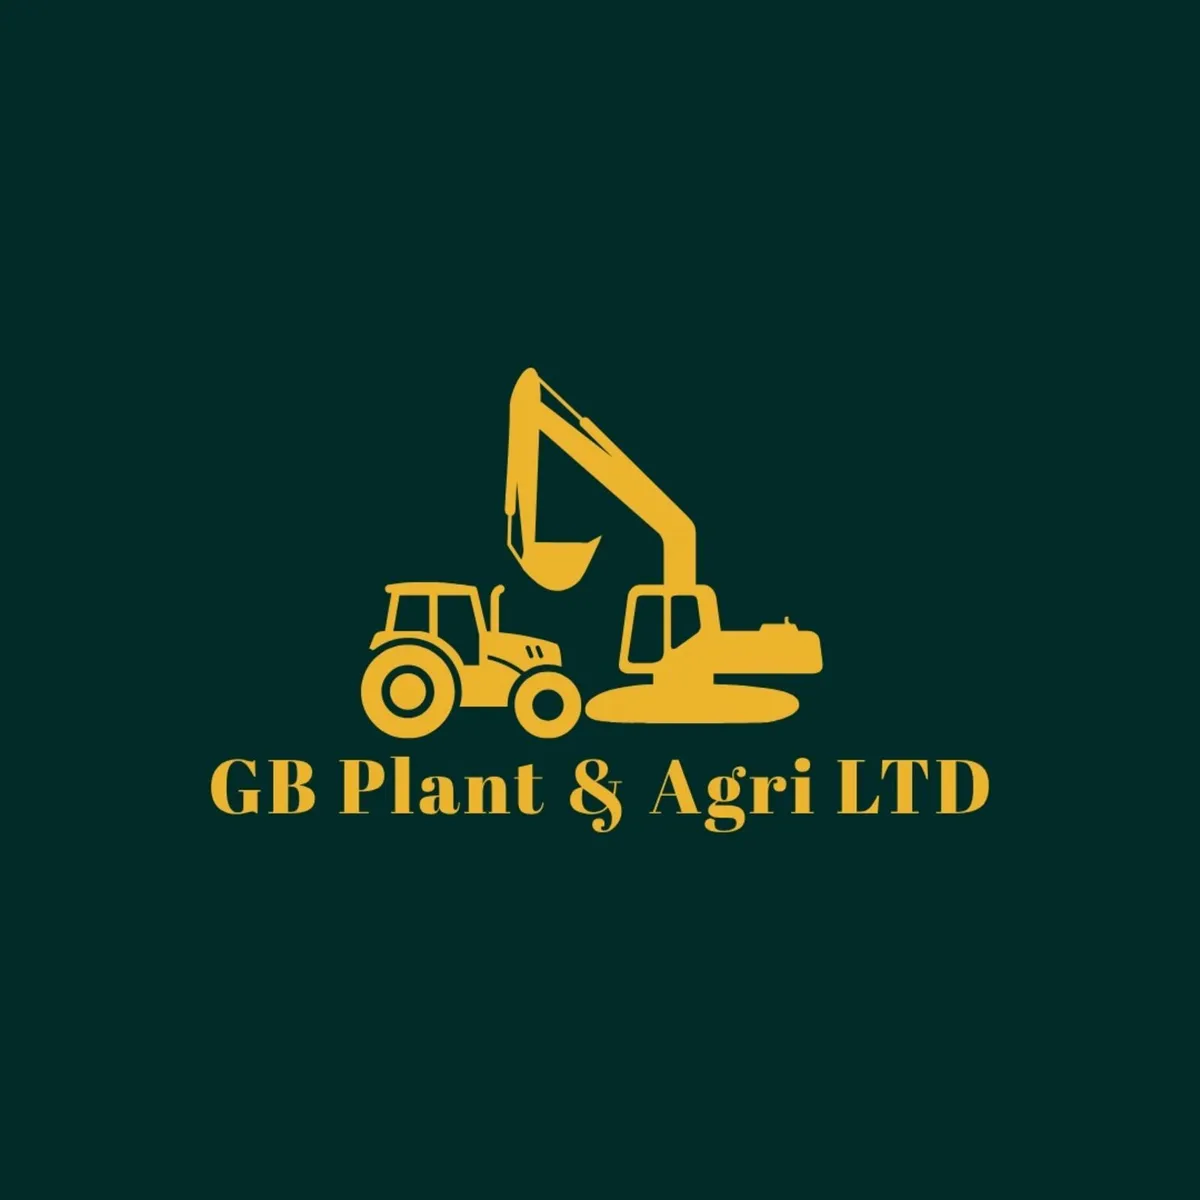 Plant hire groundwork’s contractor